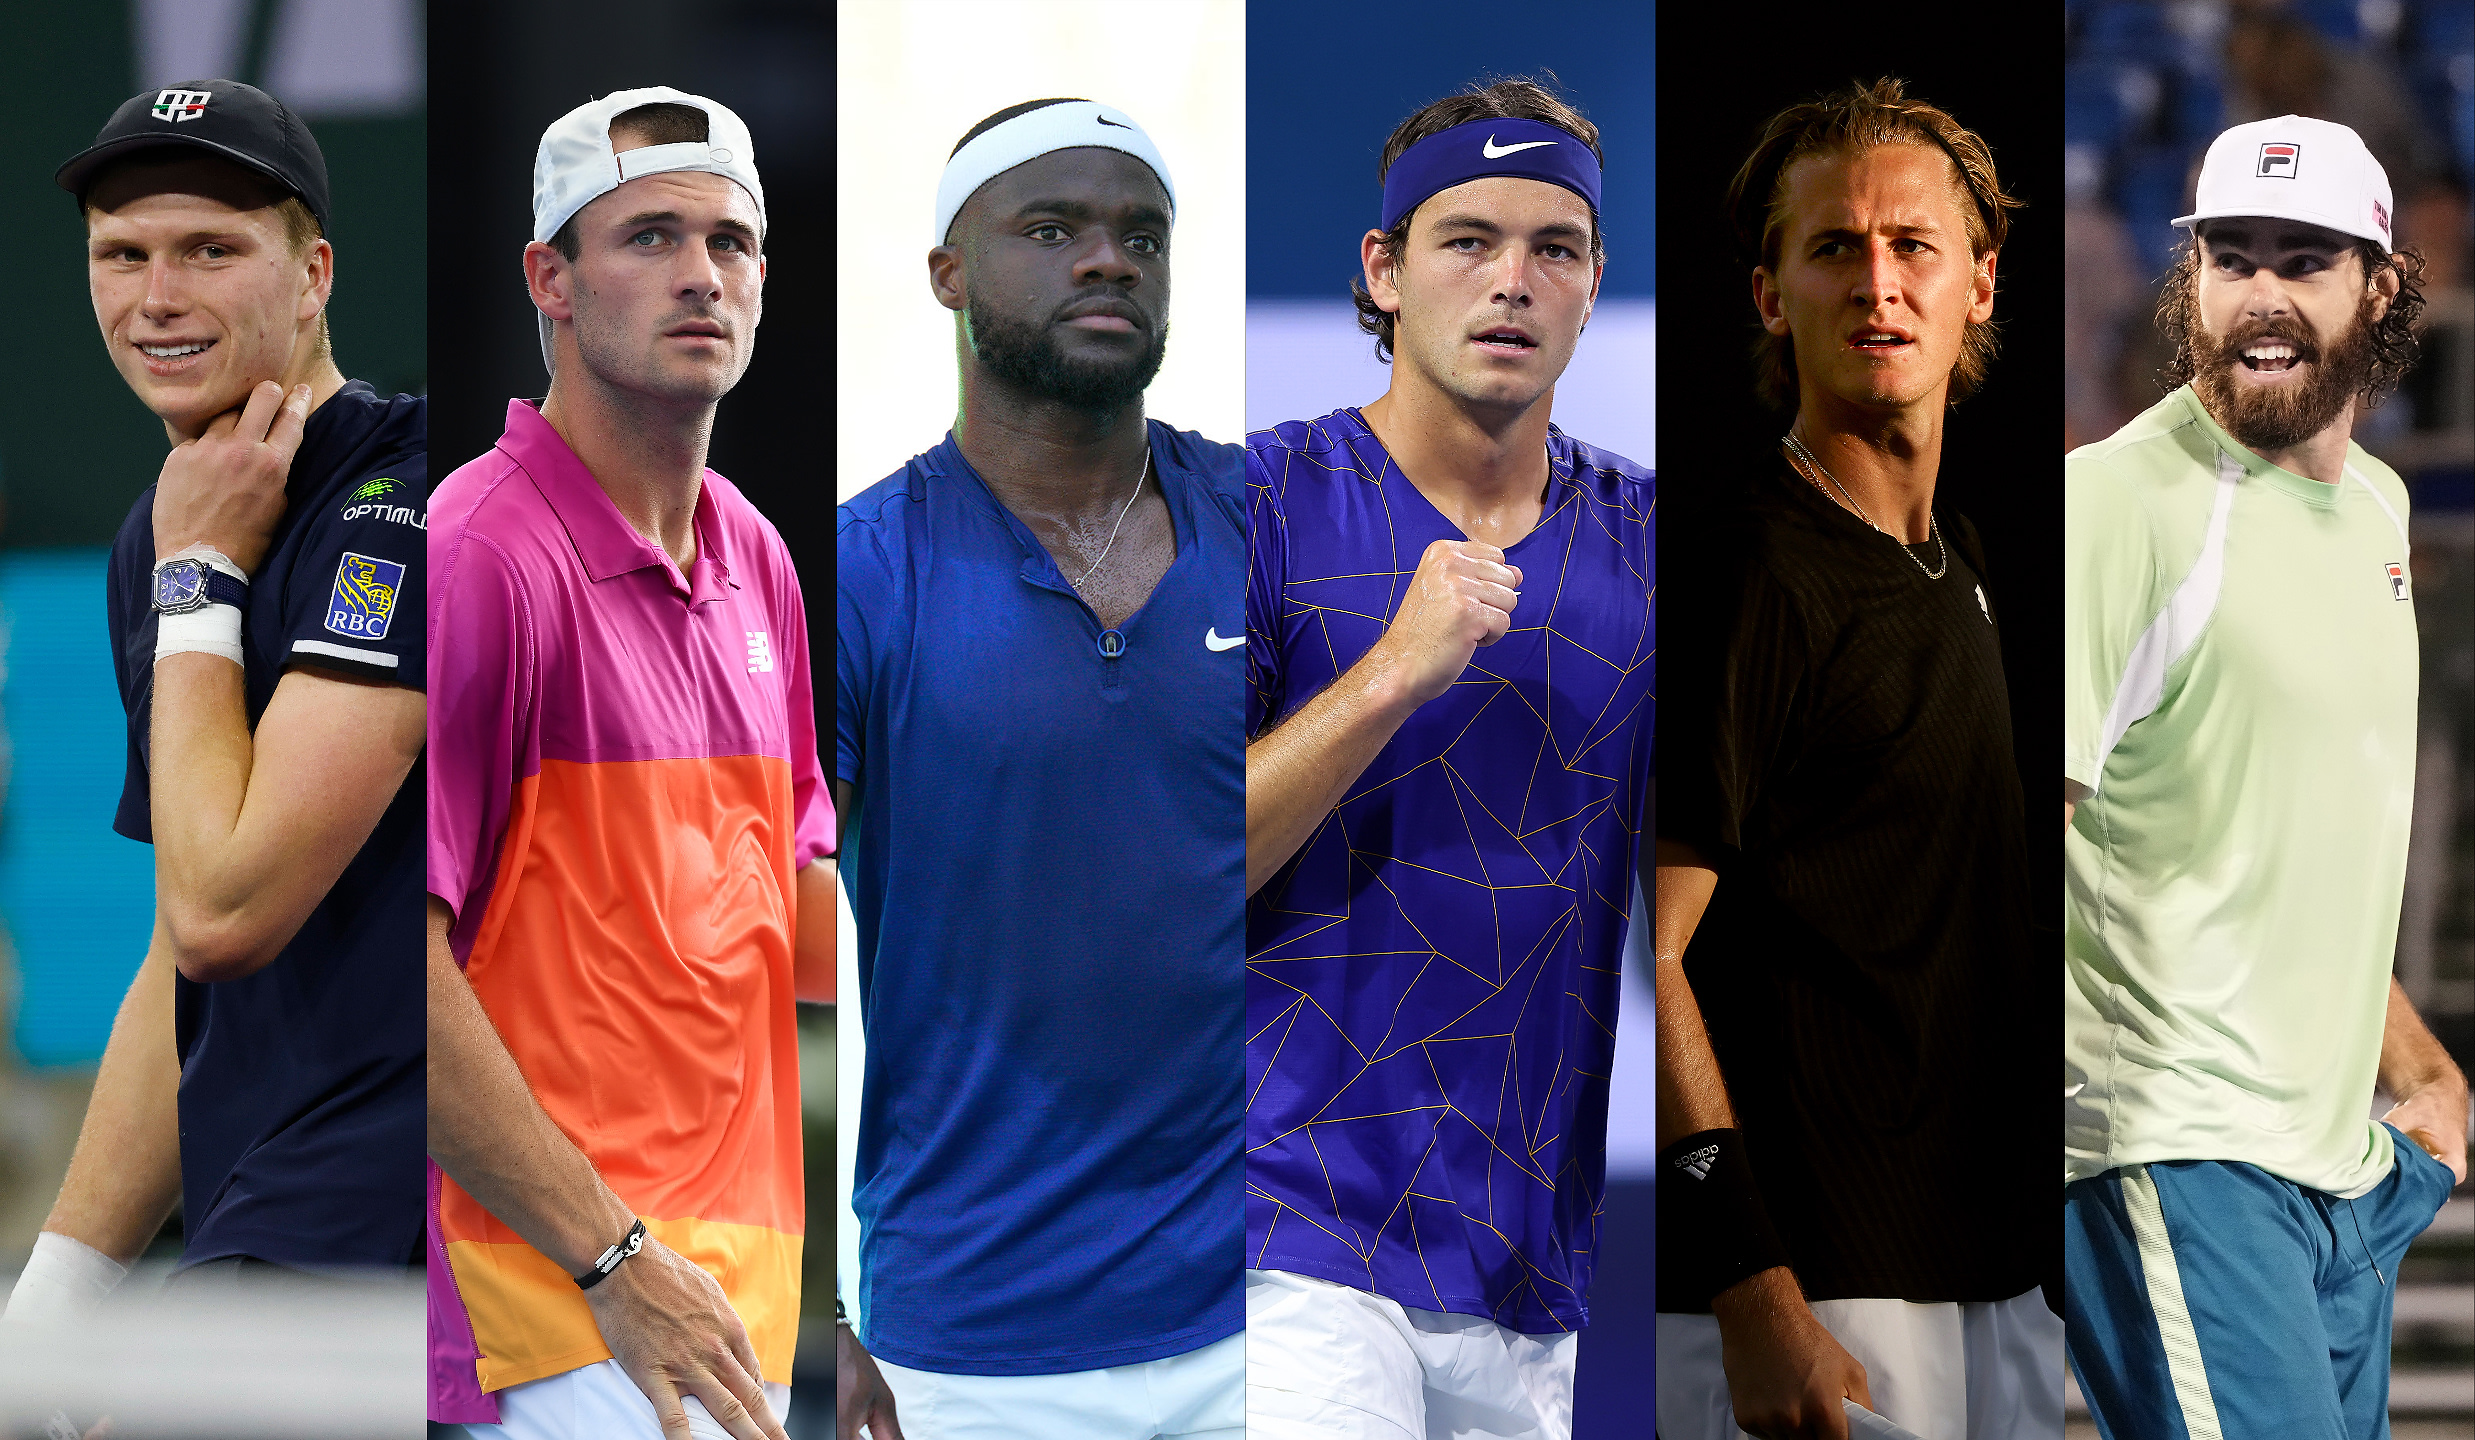 Are American men coming of age on the ATP tour? An expert panel examines six surging talents